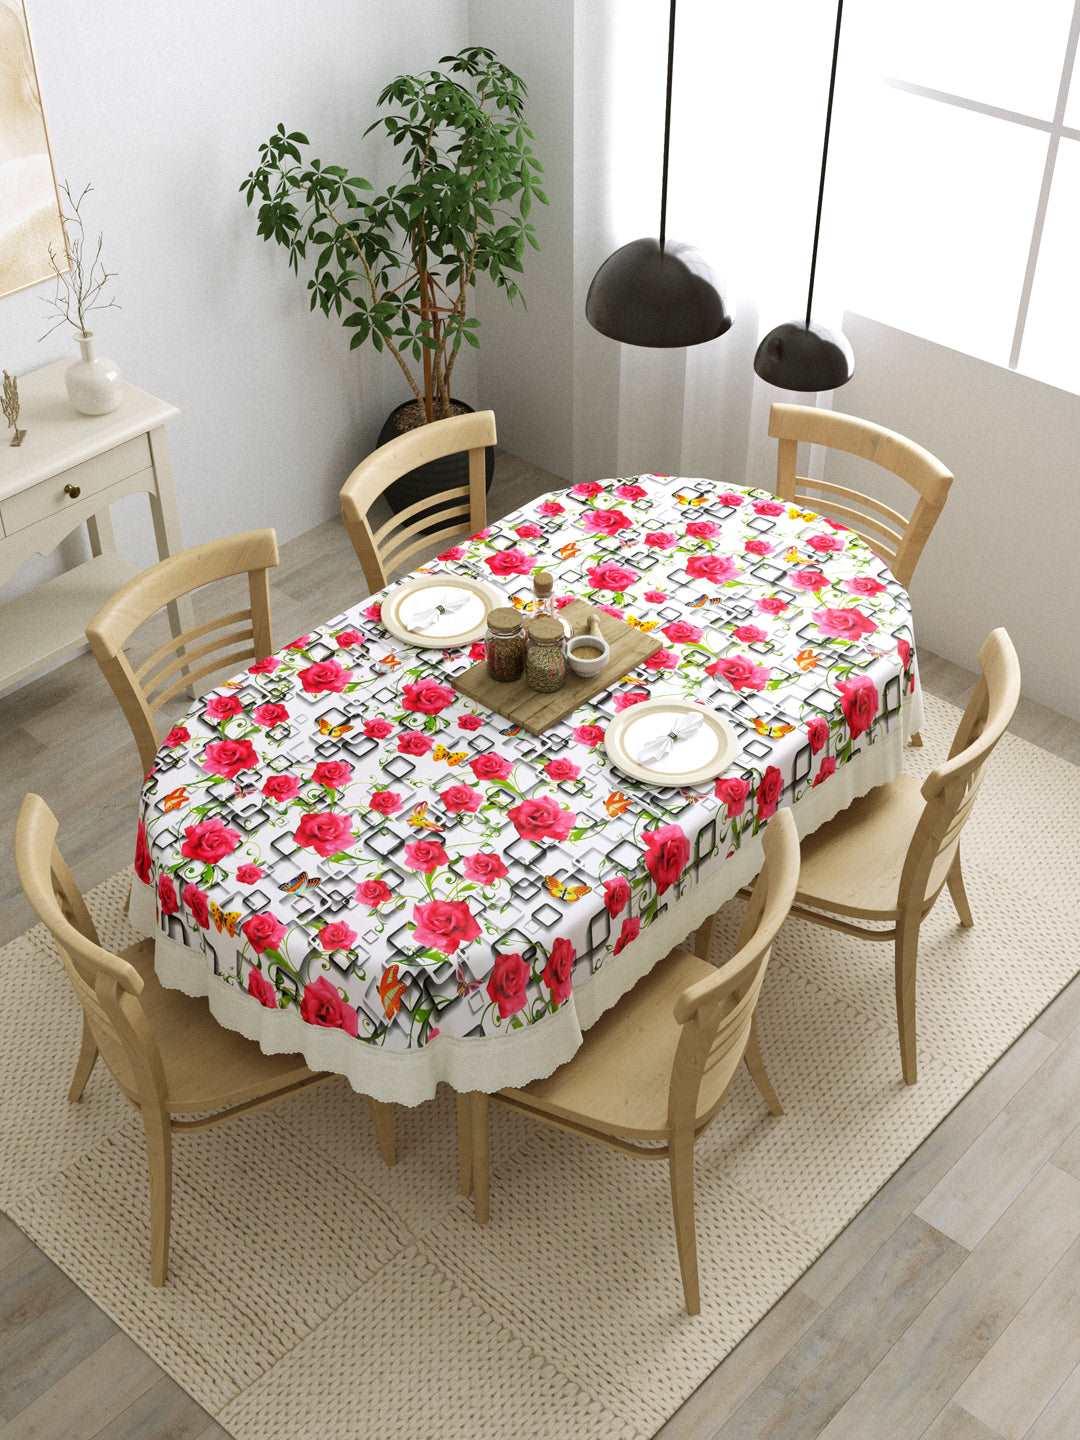 6 Seater Oval Dining Table Cover; 60x90 Inches; Material - PVC; Anti Slip; Pink Roses